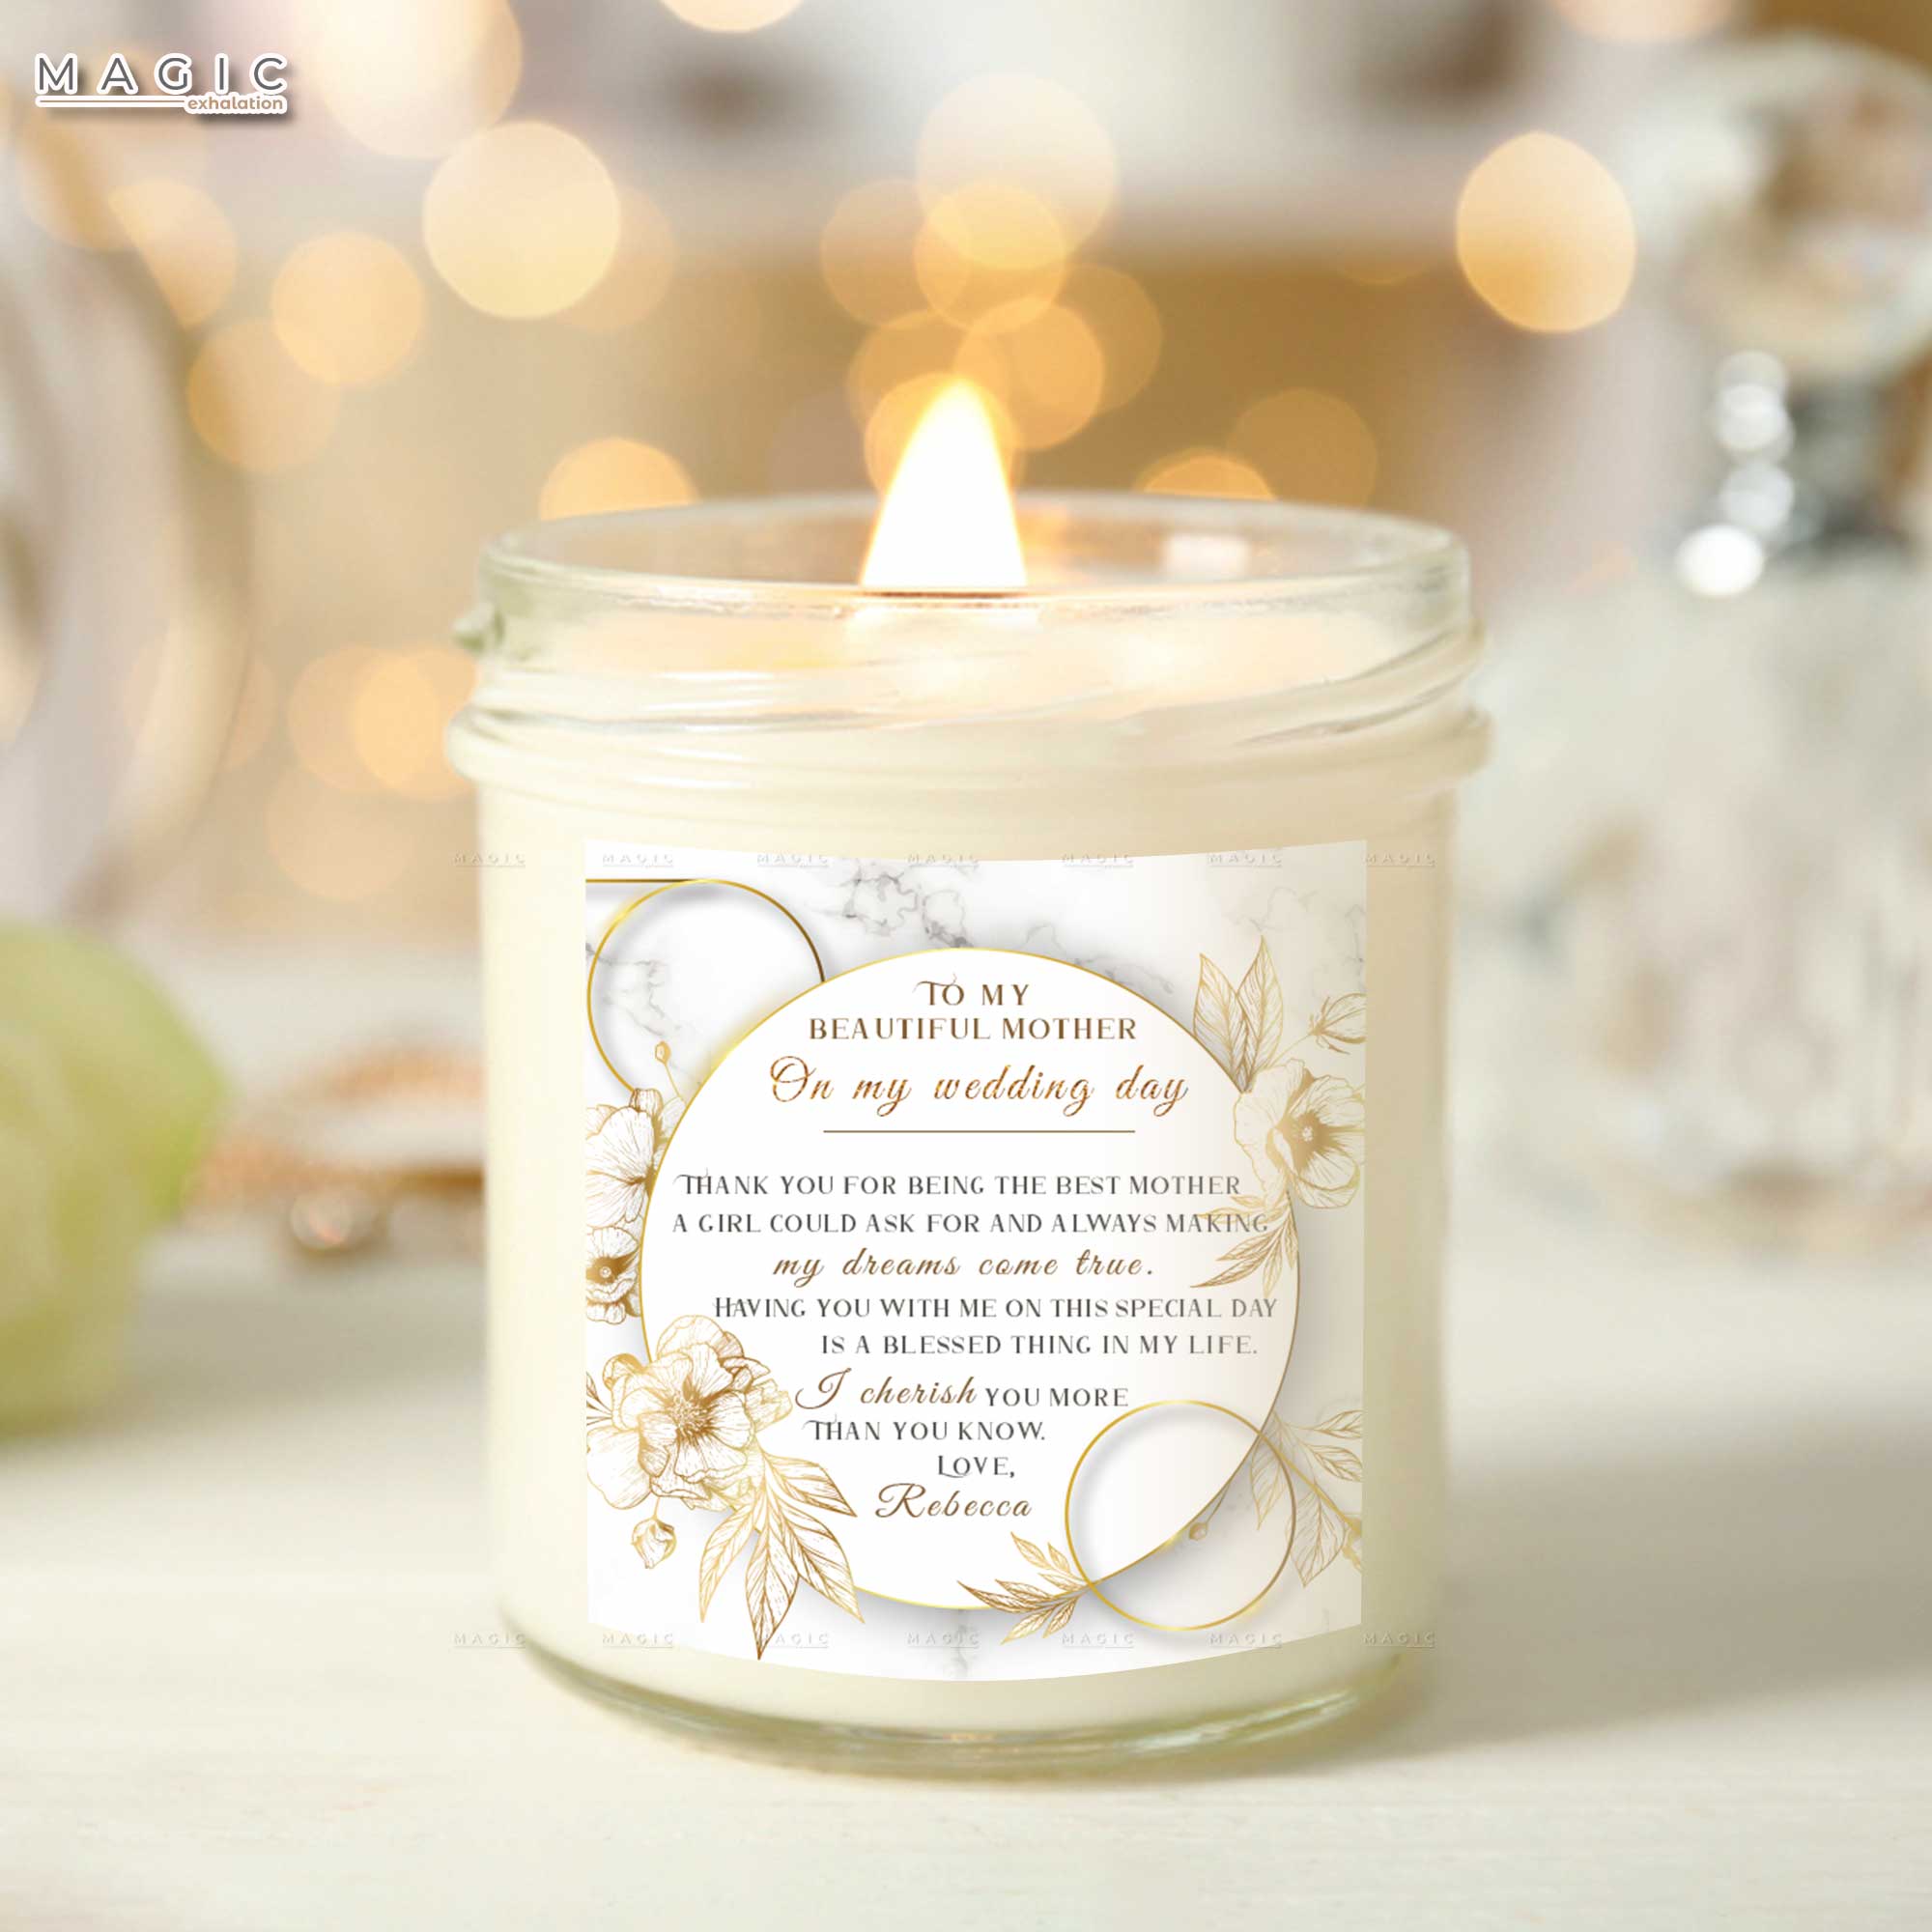 Wedding Mother Of The Bride Candle Gift, Personalized Gift For Parents Of The Bride, Gift For Mom On Wedding Day, Candles Scented Vanilla Soy Wax Candle